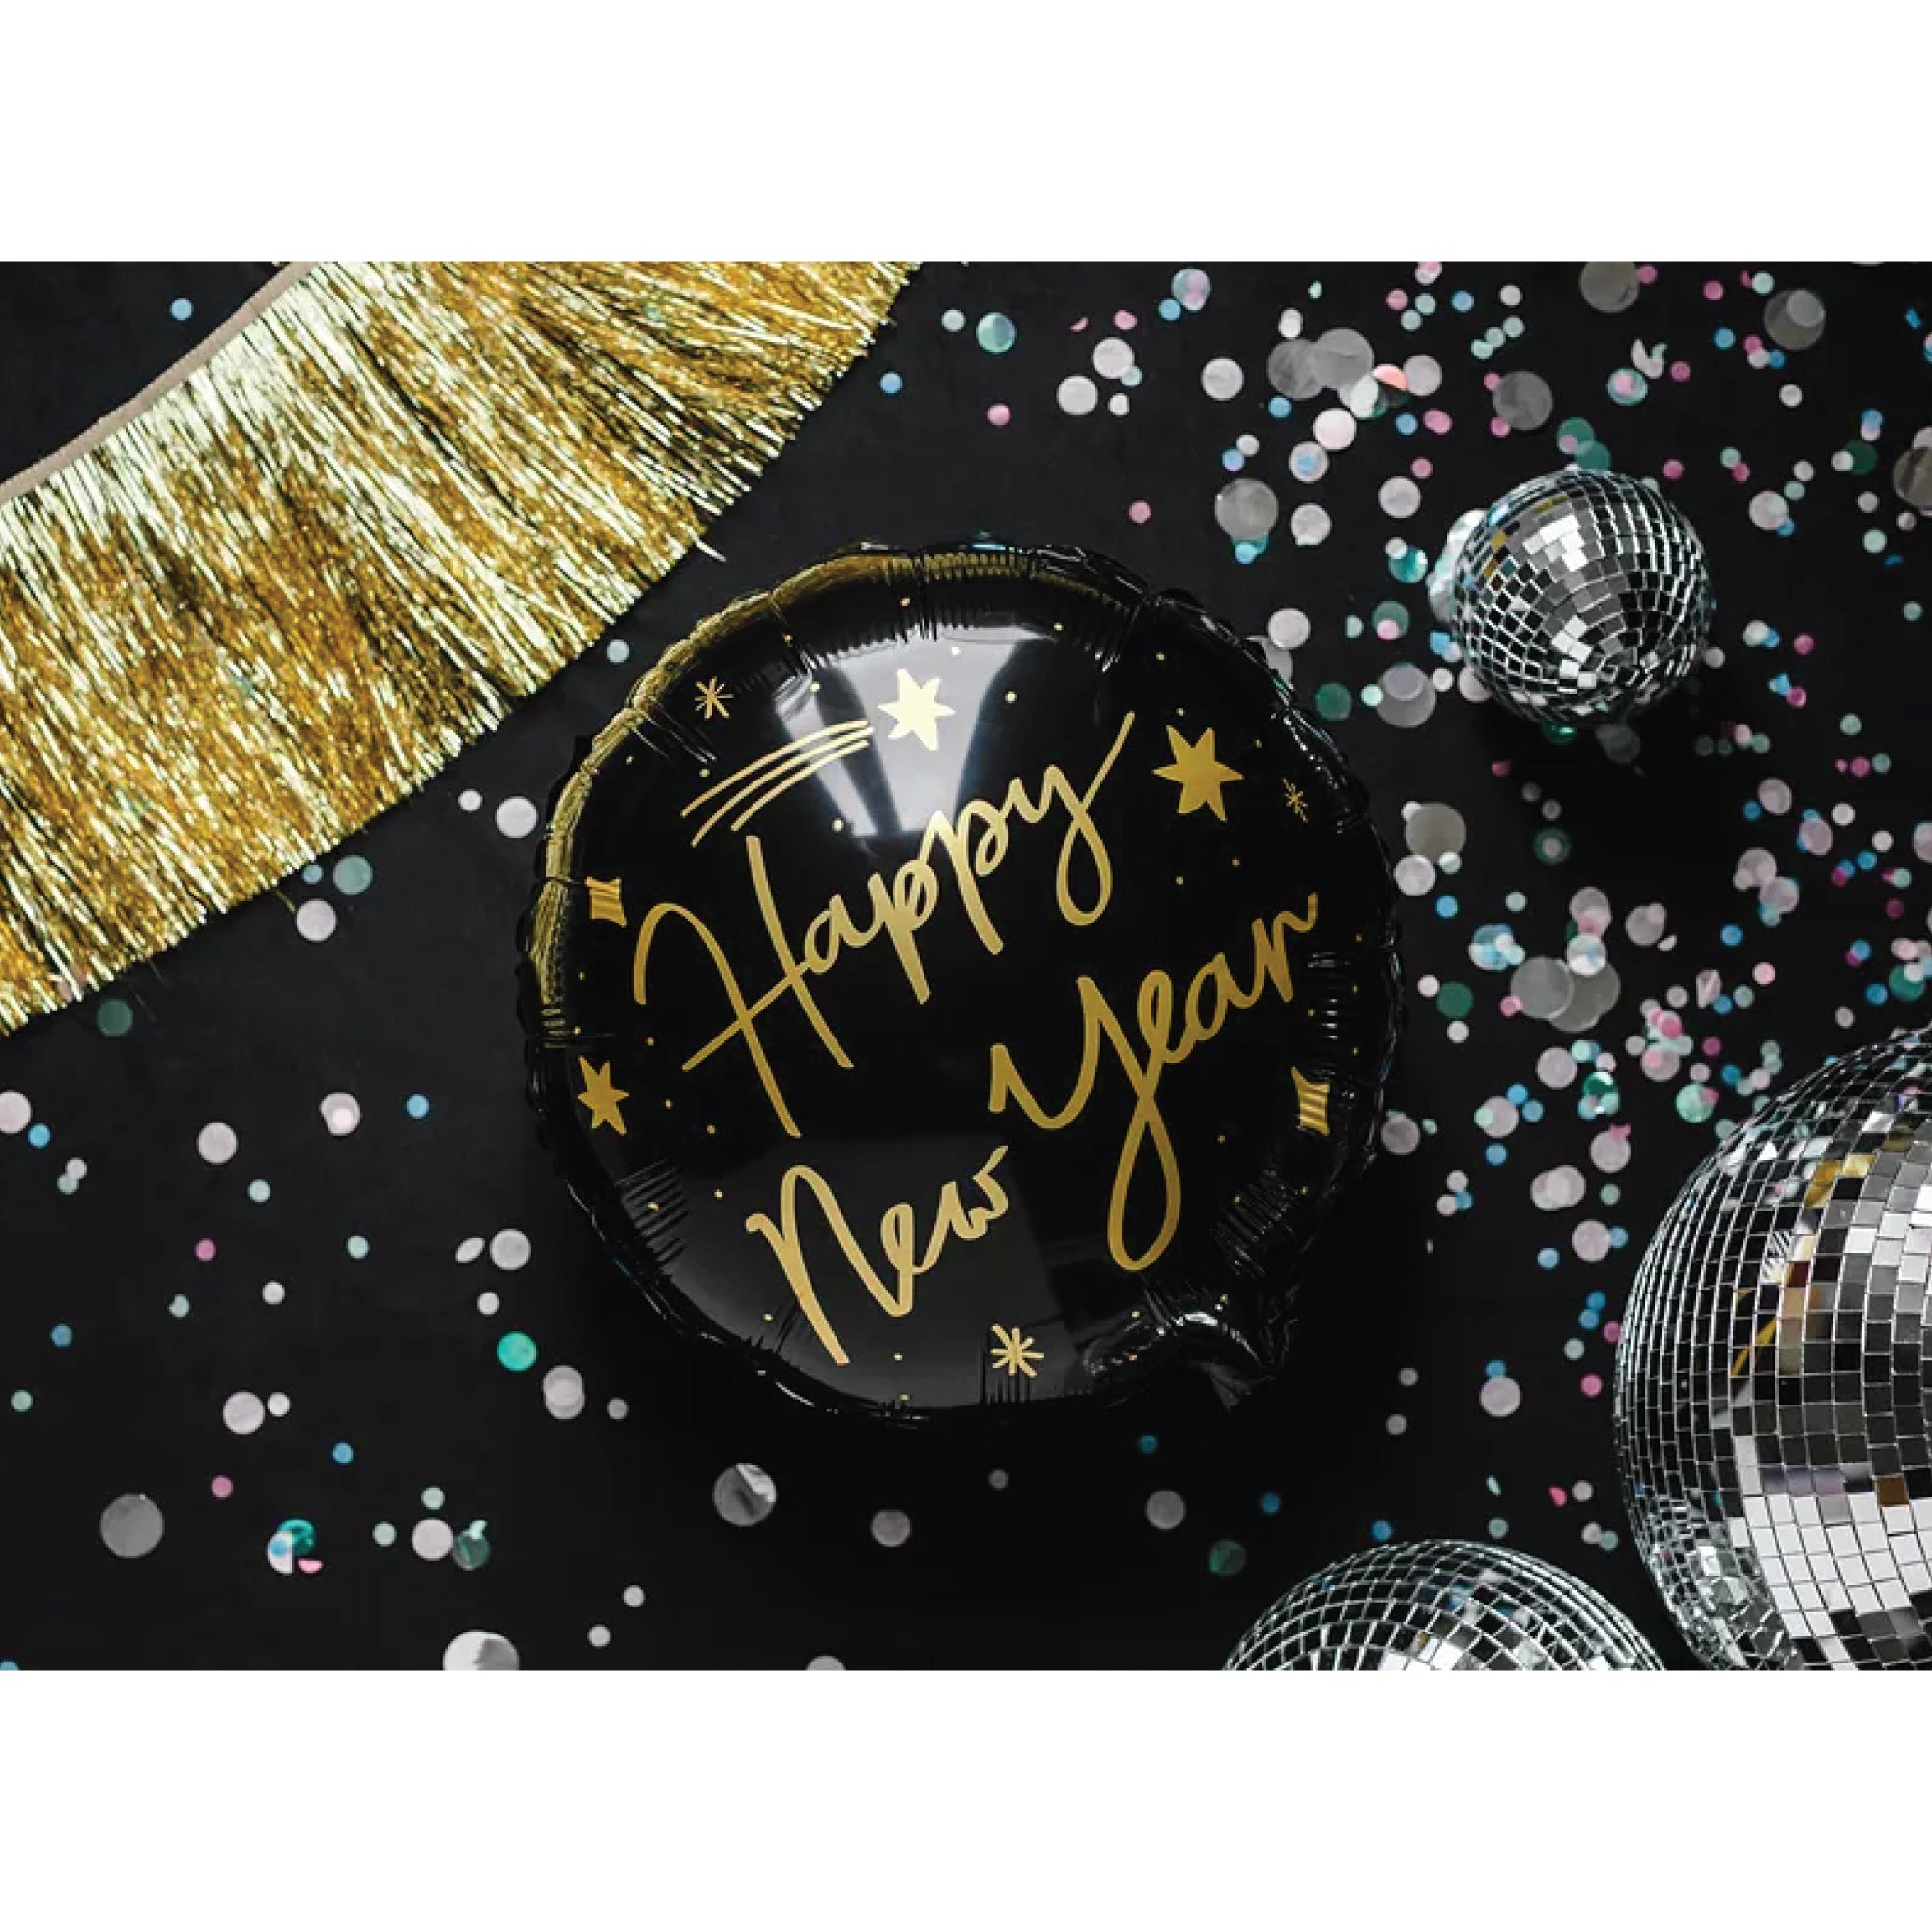 Black Happy New Year Foil Balloon | The Party Darling